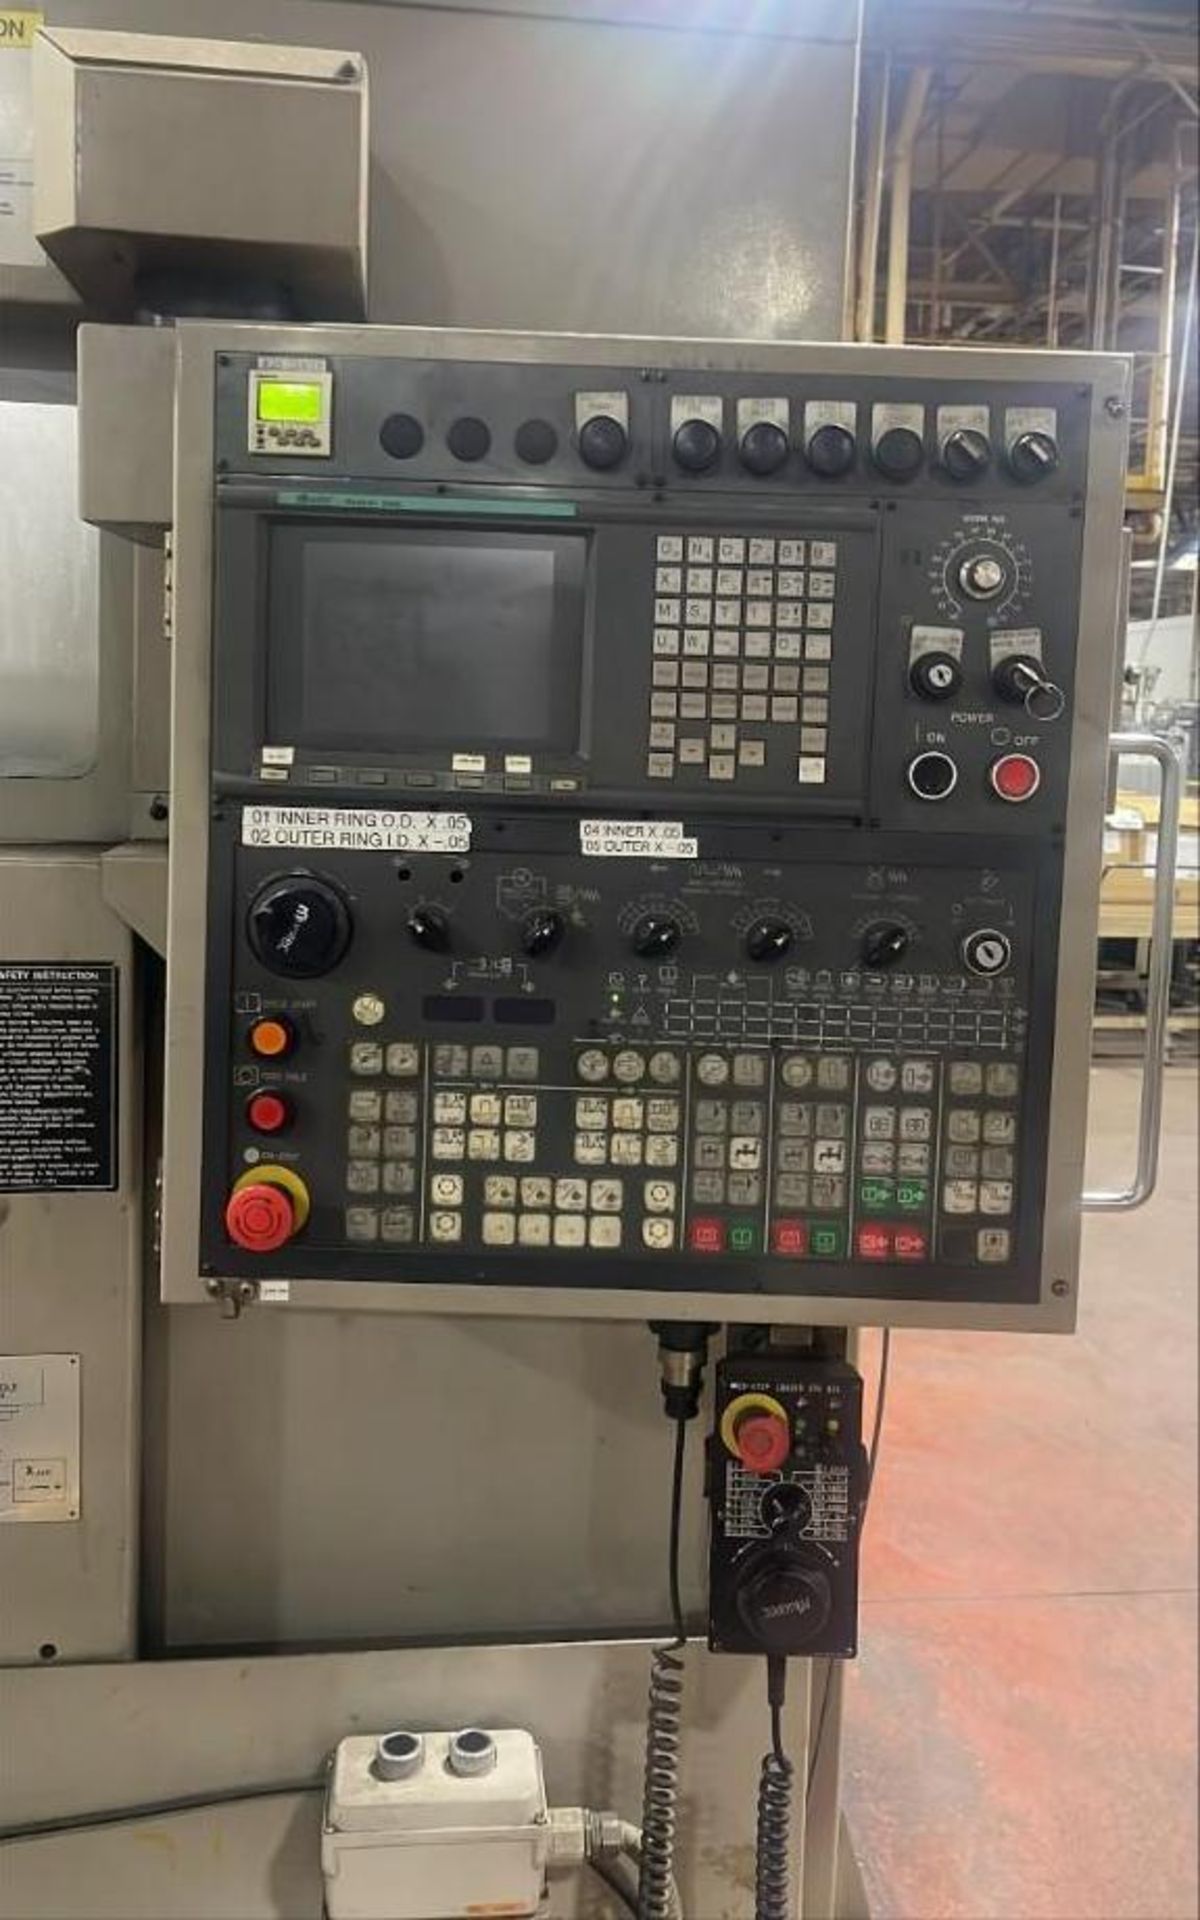 2001 Muratec MW120 Twin Spindle CNC Lathe - Image 7 of 7